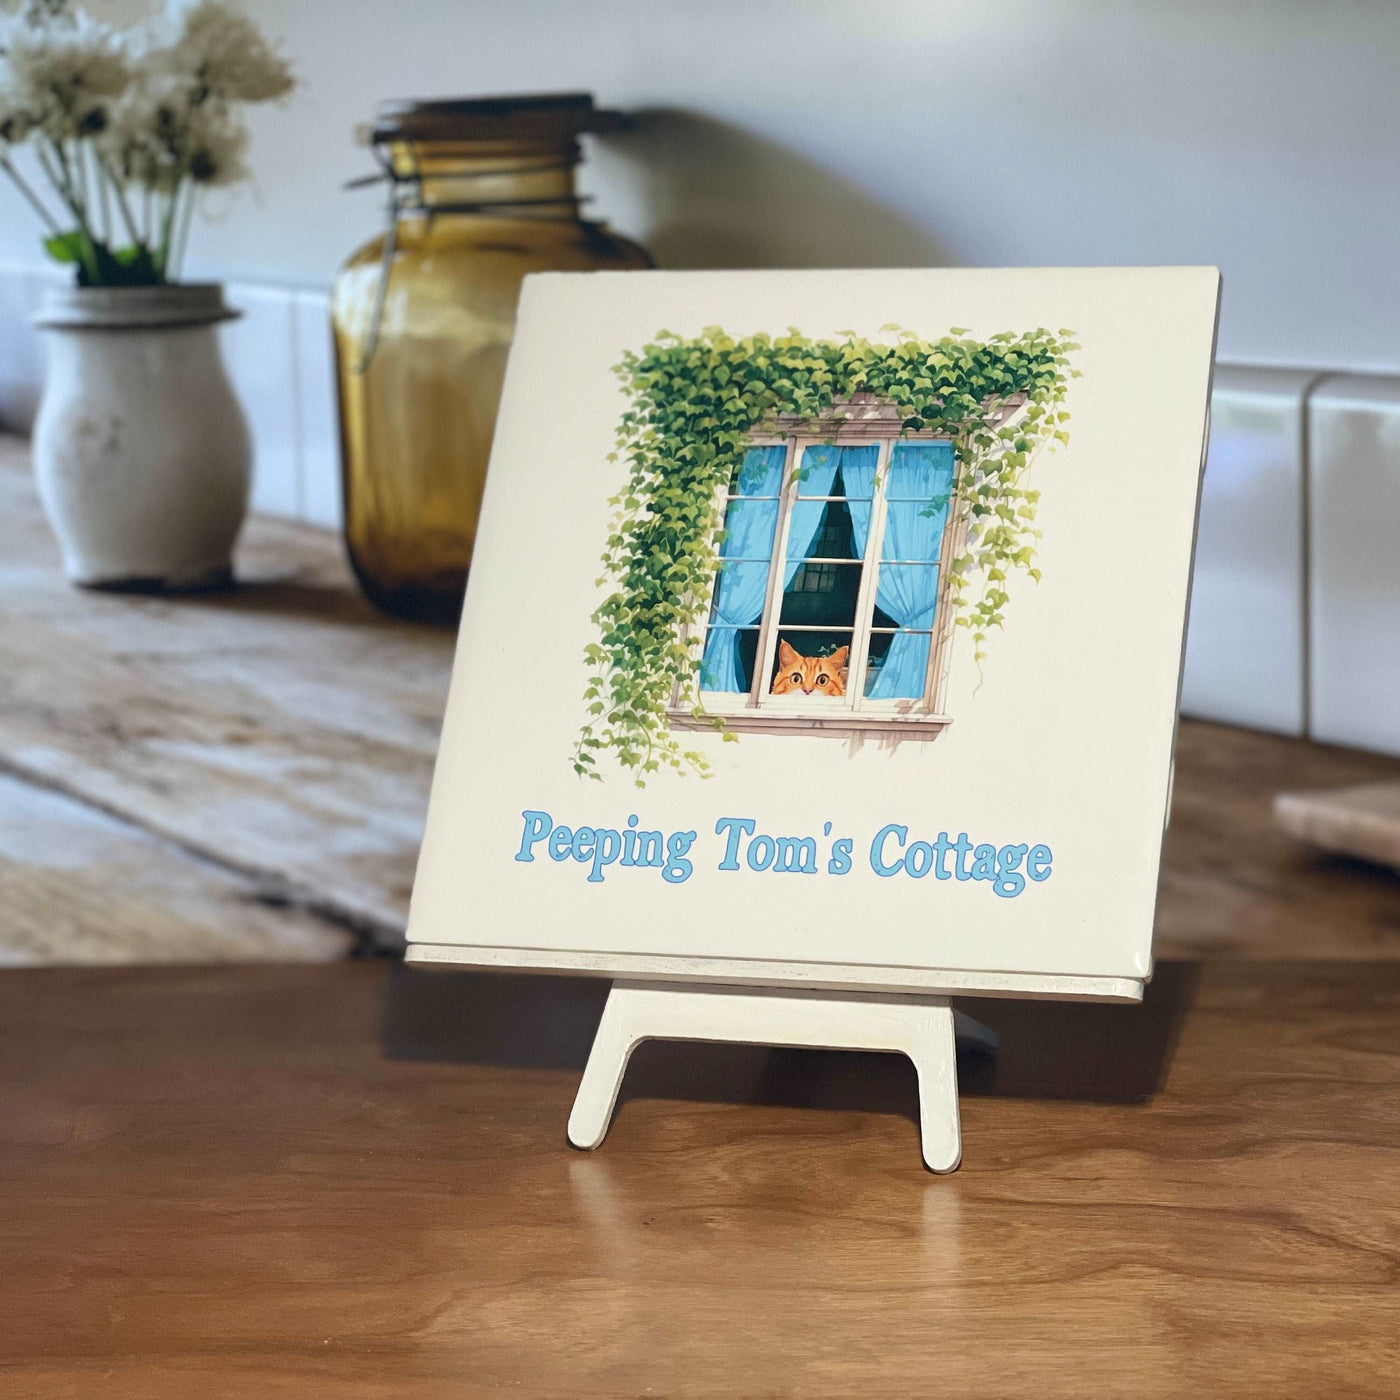 Peeping Tom's Cottage Custom Printed Tile Colorful Birds Stained Glass Style Decorative Ceramic Tile - Handcrafted Art for Home Decor